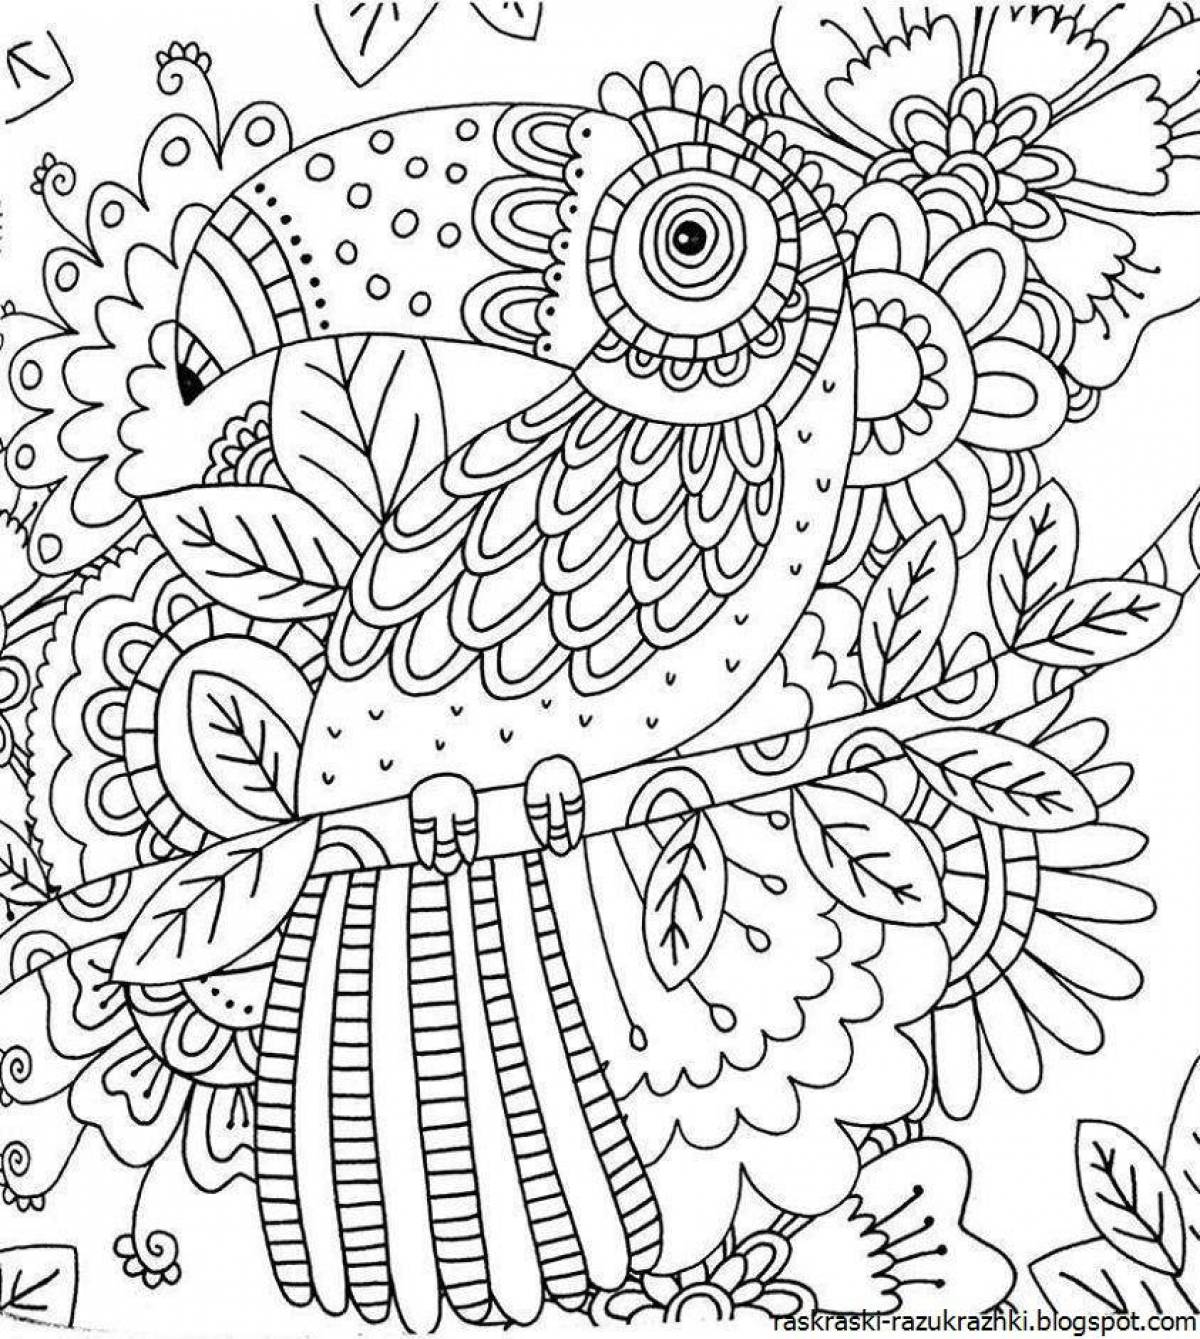 Color anti-stress coloring book for children 6-7 years old